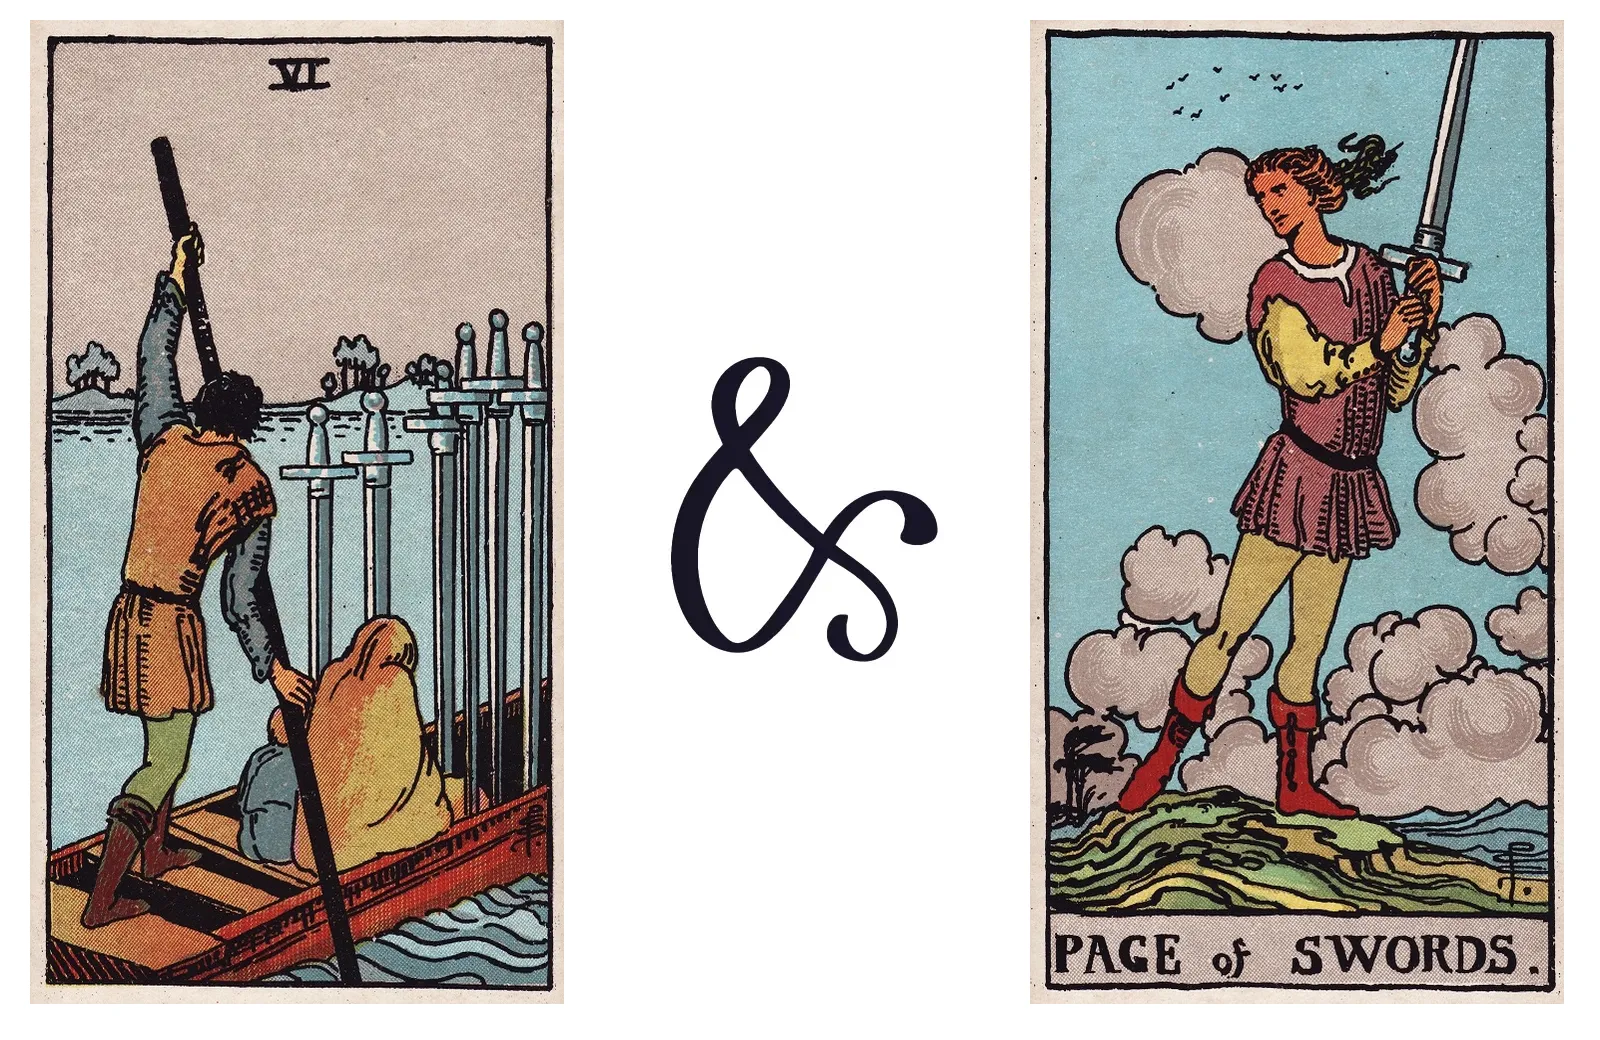 Six of Swords and Page of Swords